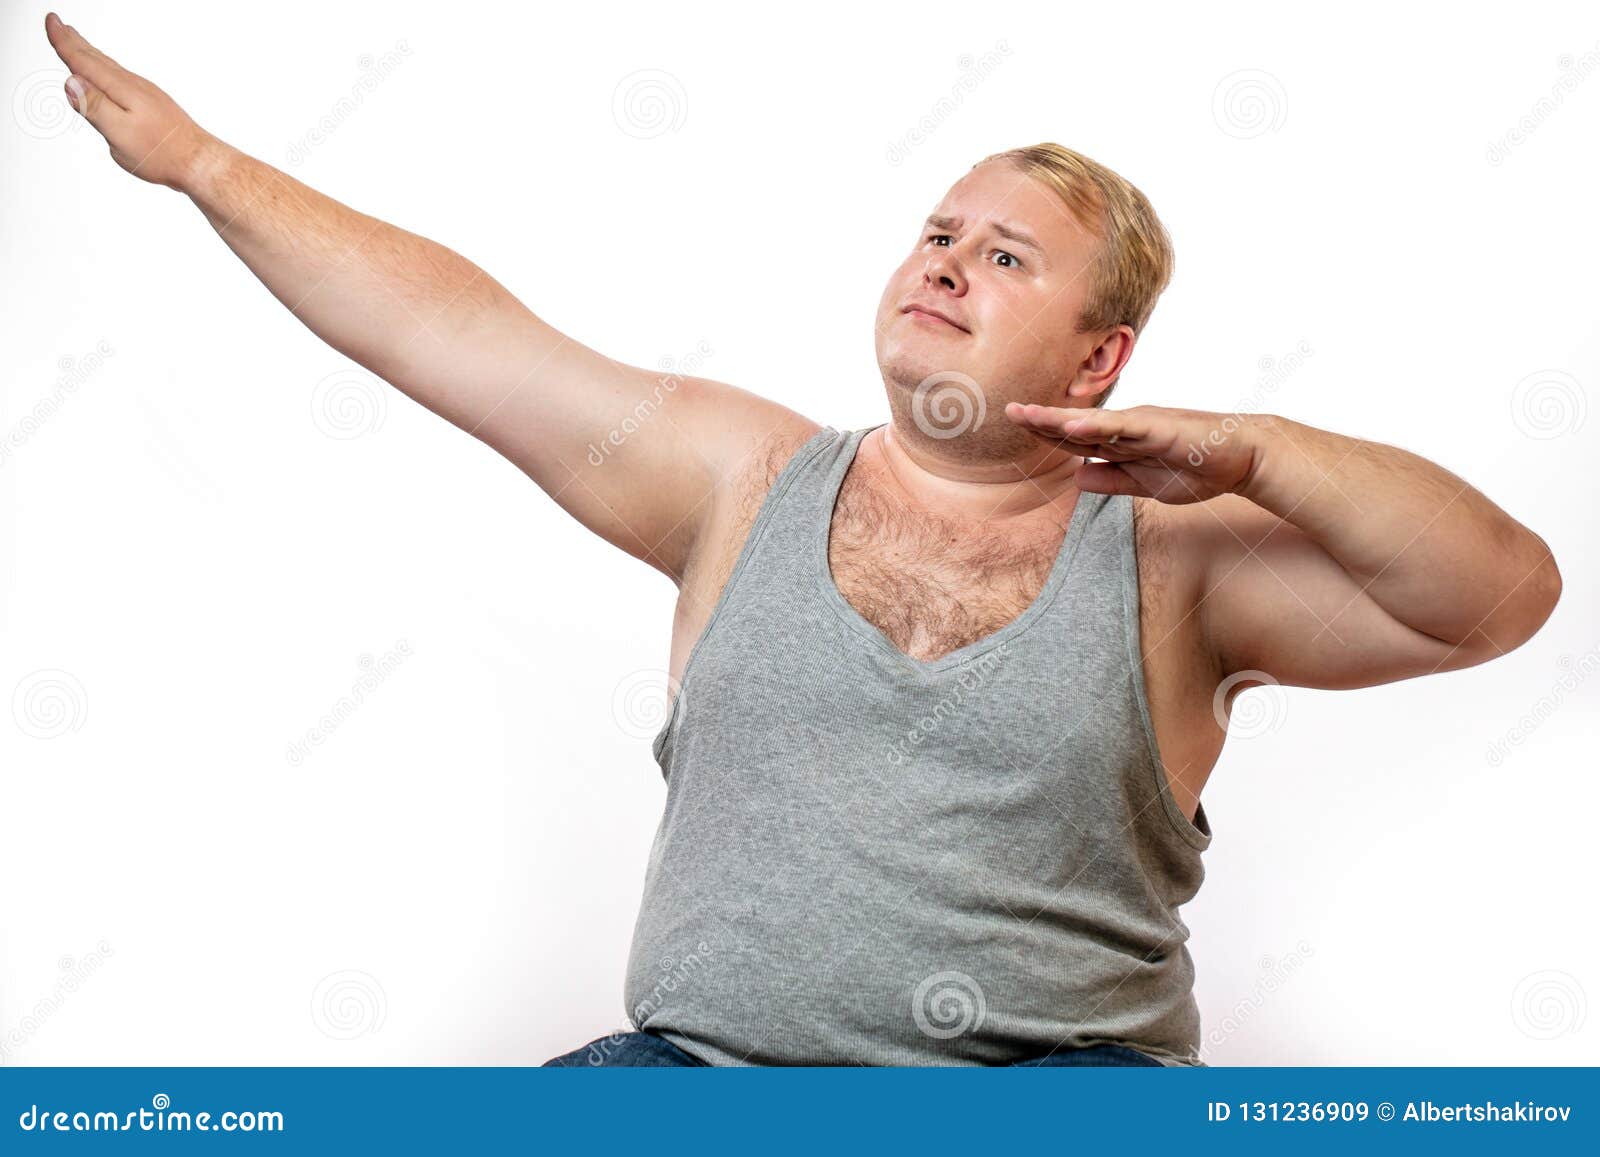 fat-proud-young-man-making-gesture-hand-isolated-white-background-overweight-adult-blonde-gesturing-raised-hands-131236909.jpg